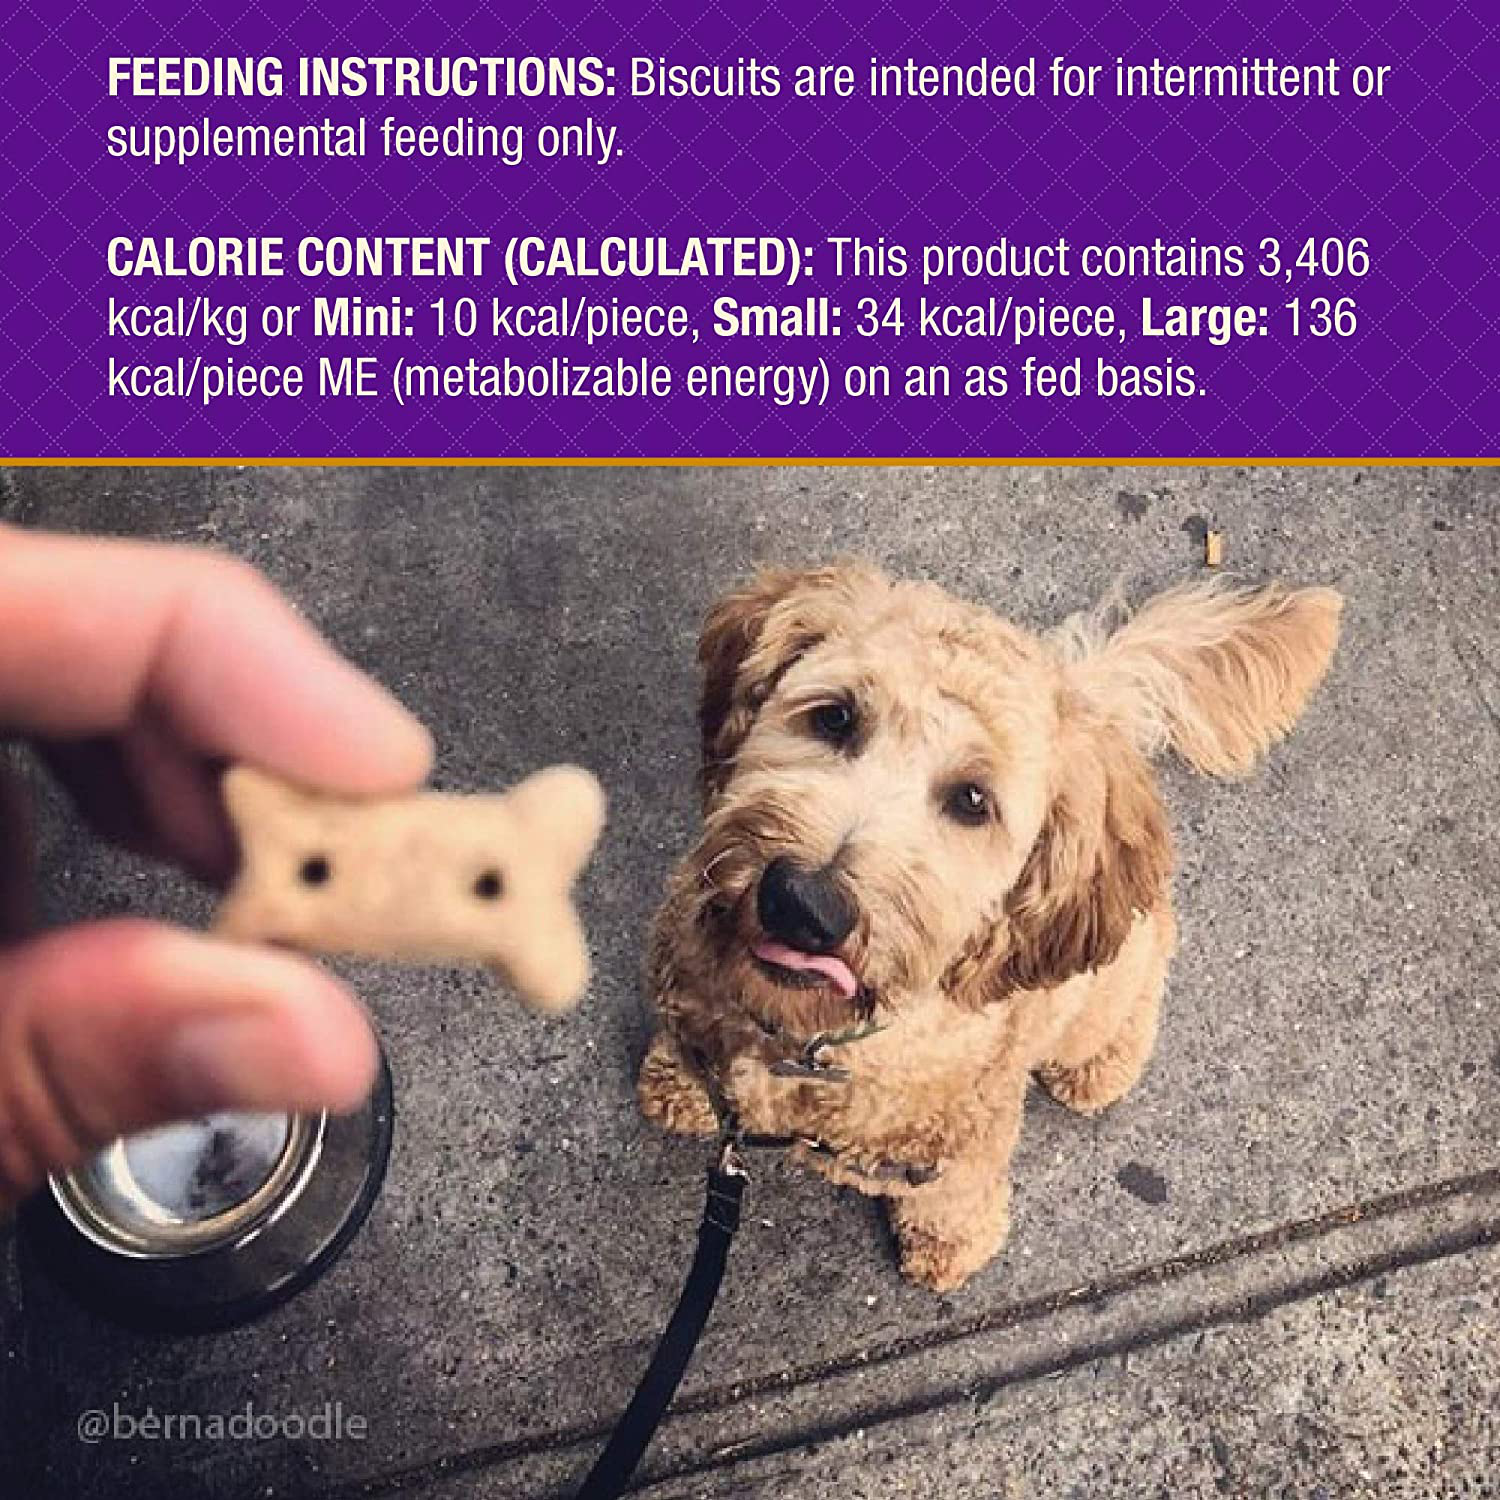 Old Mother Hubbard Classic P-Nuttier Peanut Butter Dog Treats, Oven Baked Crunchy Treats for Small Dogs, All Natural, Healthy, Small Training Treats Animals & Pet Supplies > Pet Supplies > Dog Supplies > Dog Treats Old Mother Hubbard   